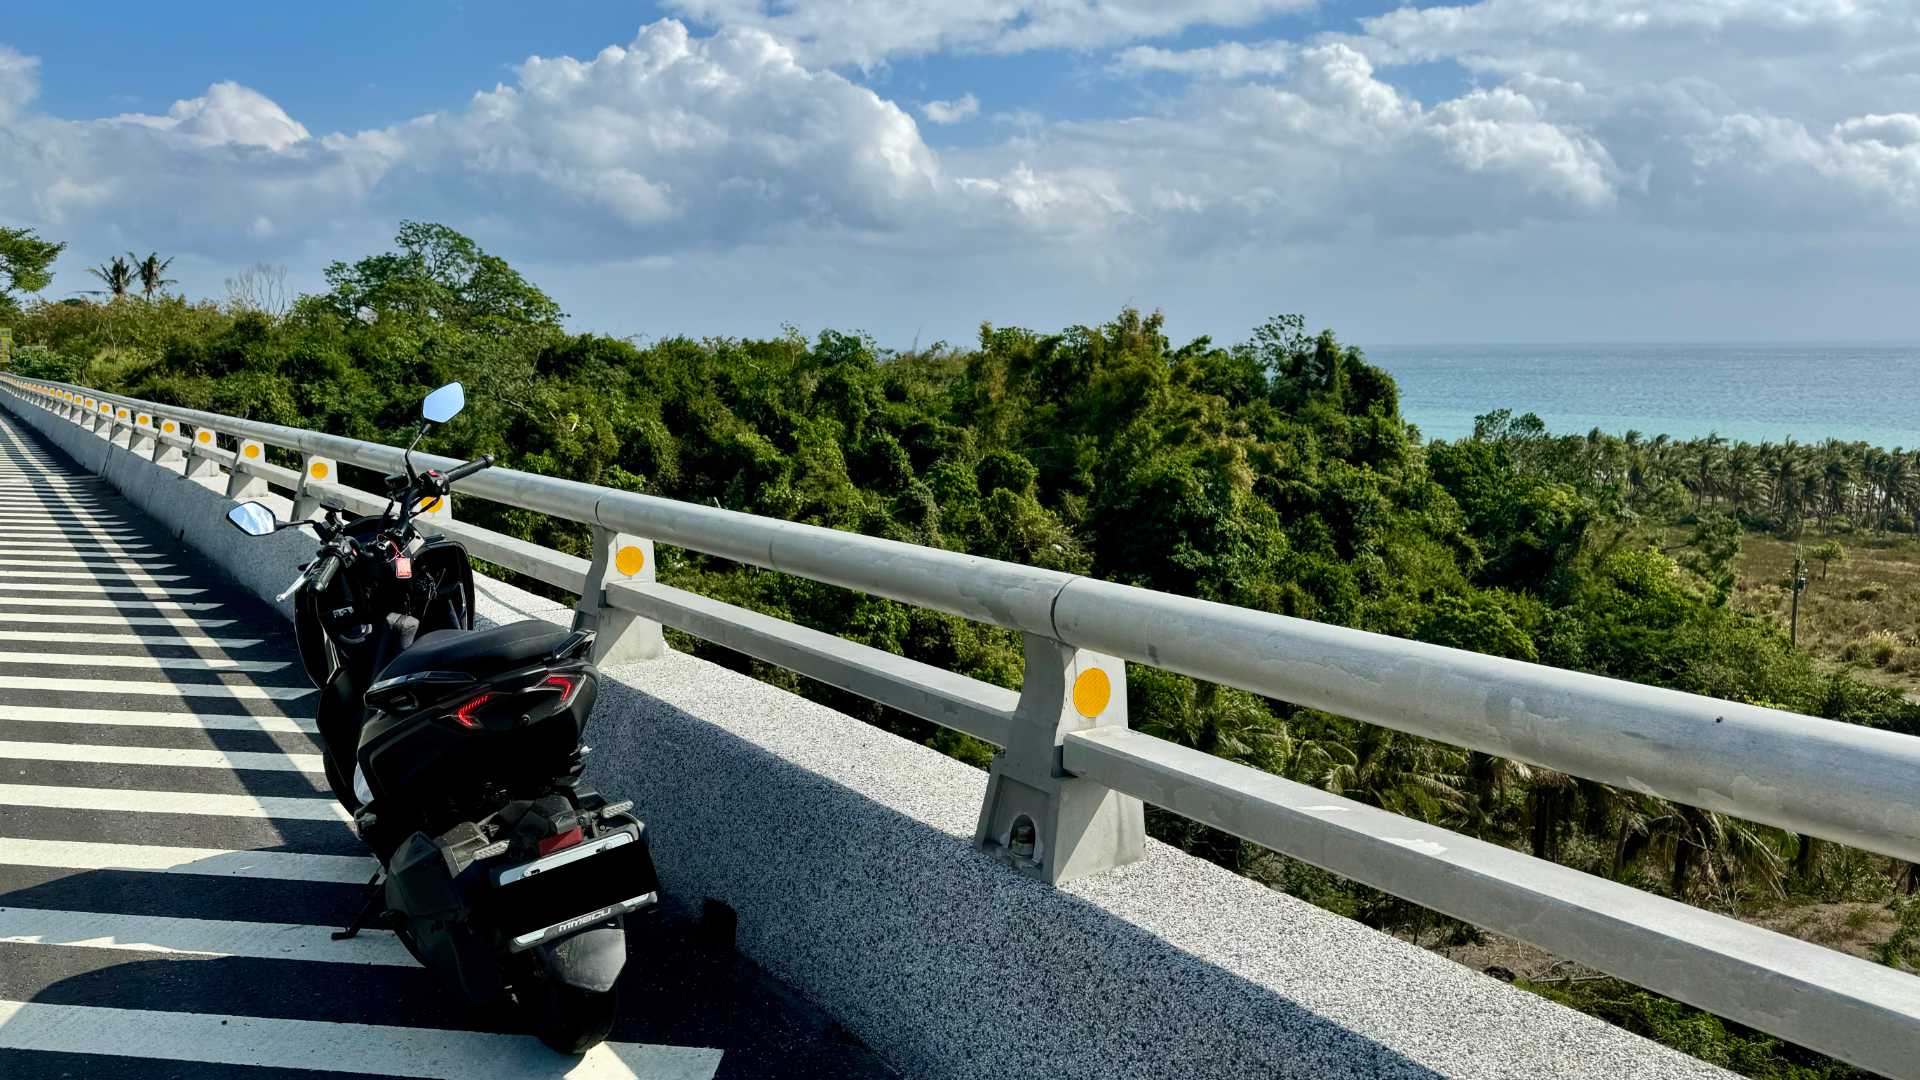 A scooter parked on an elevated roadway, with forest and coconut trees, and the sea, in the distance.